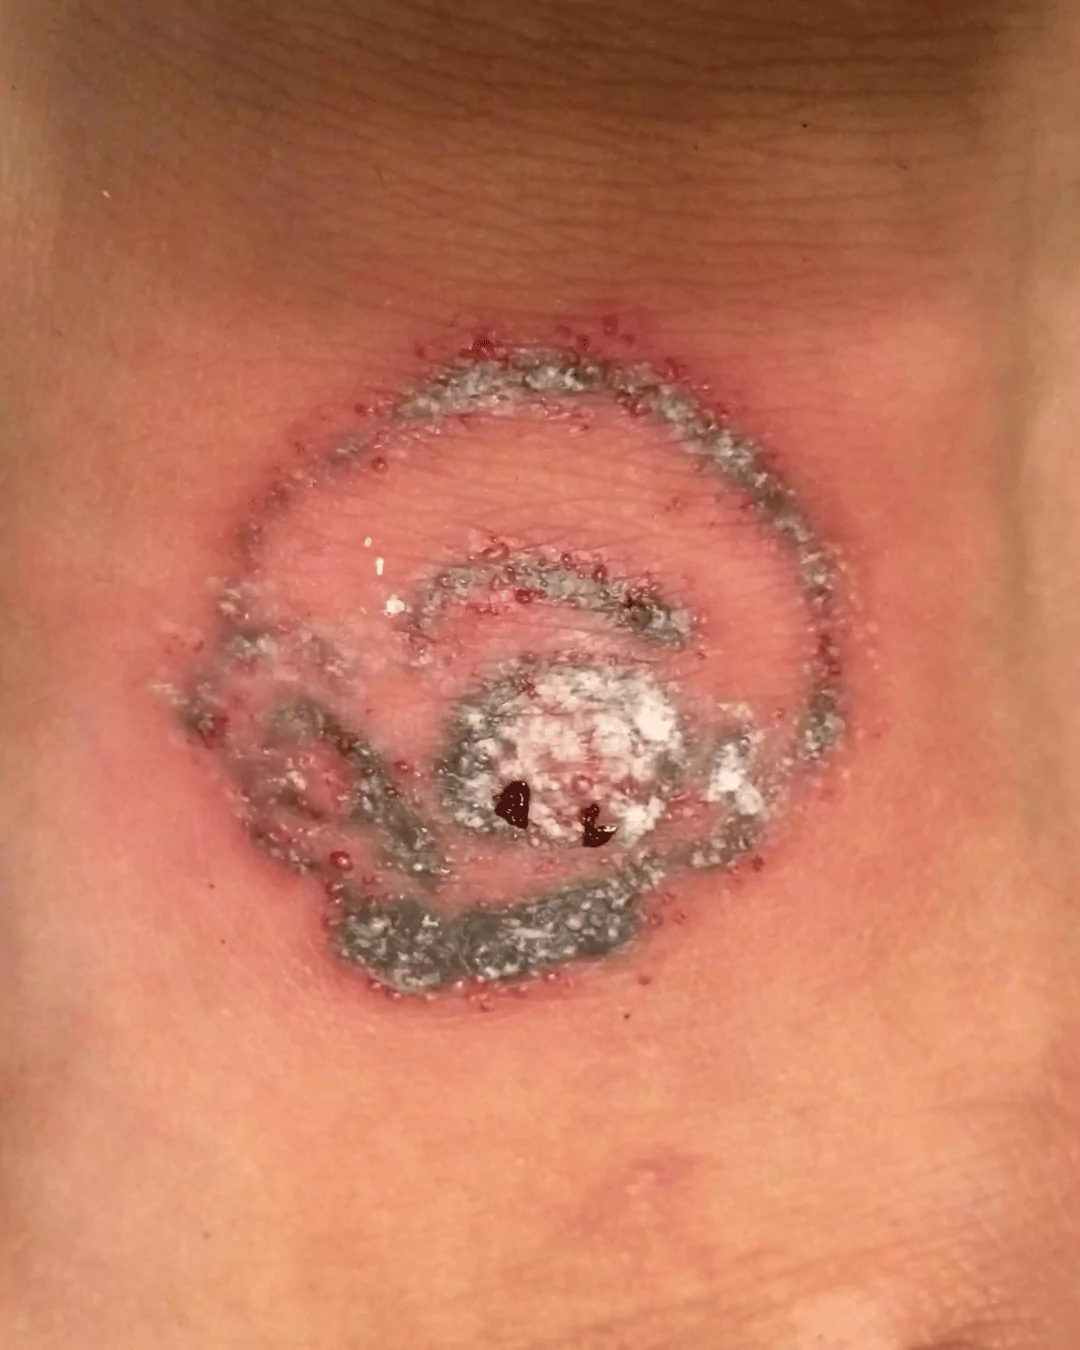 Tattoo Removal: A Diary (With Pictures)